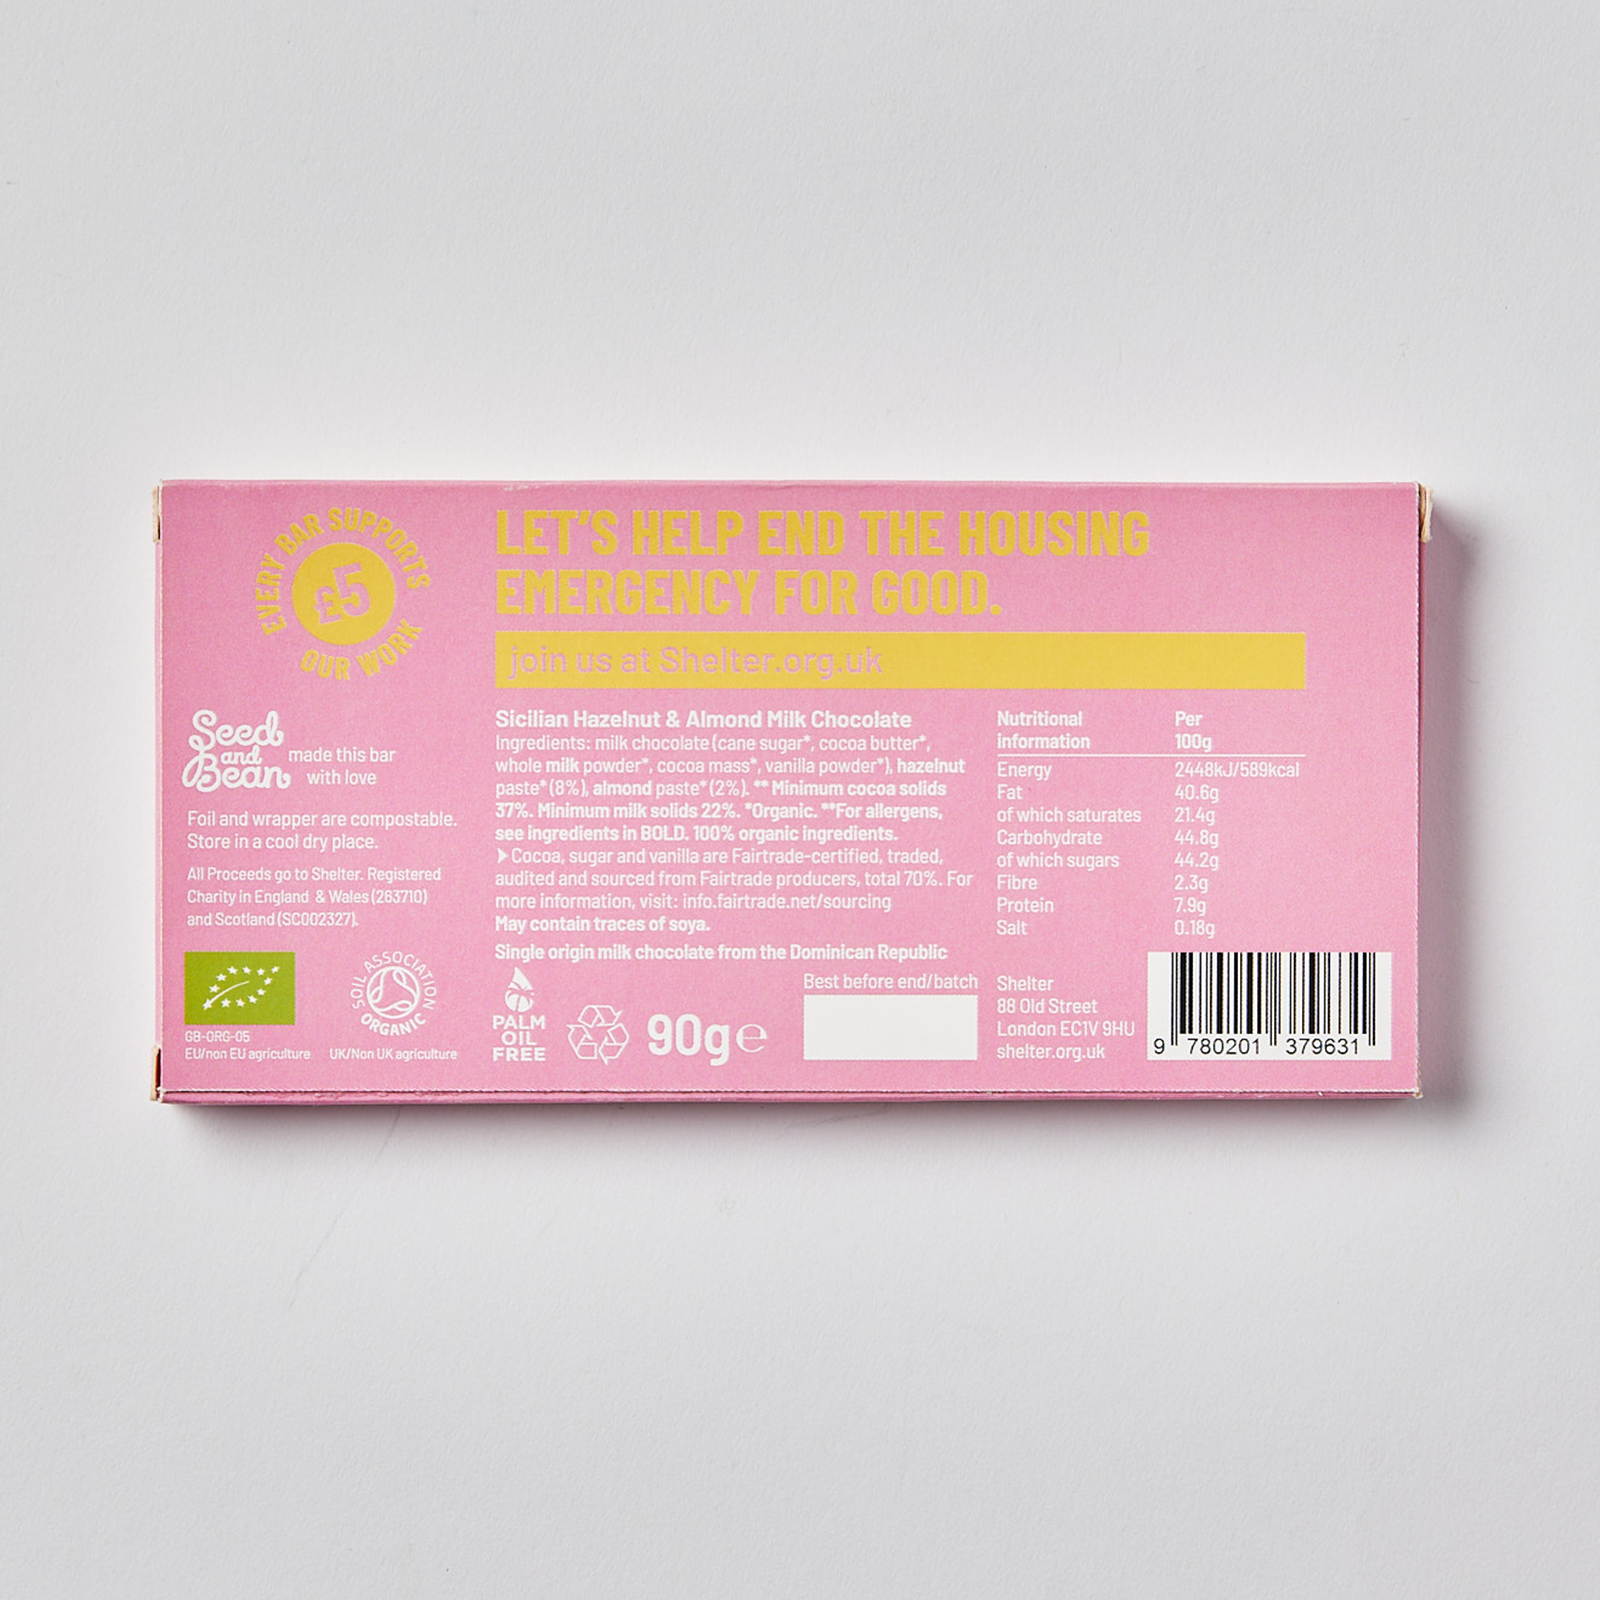 Pink wrapper chocolate bar showing nutritional information